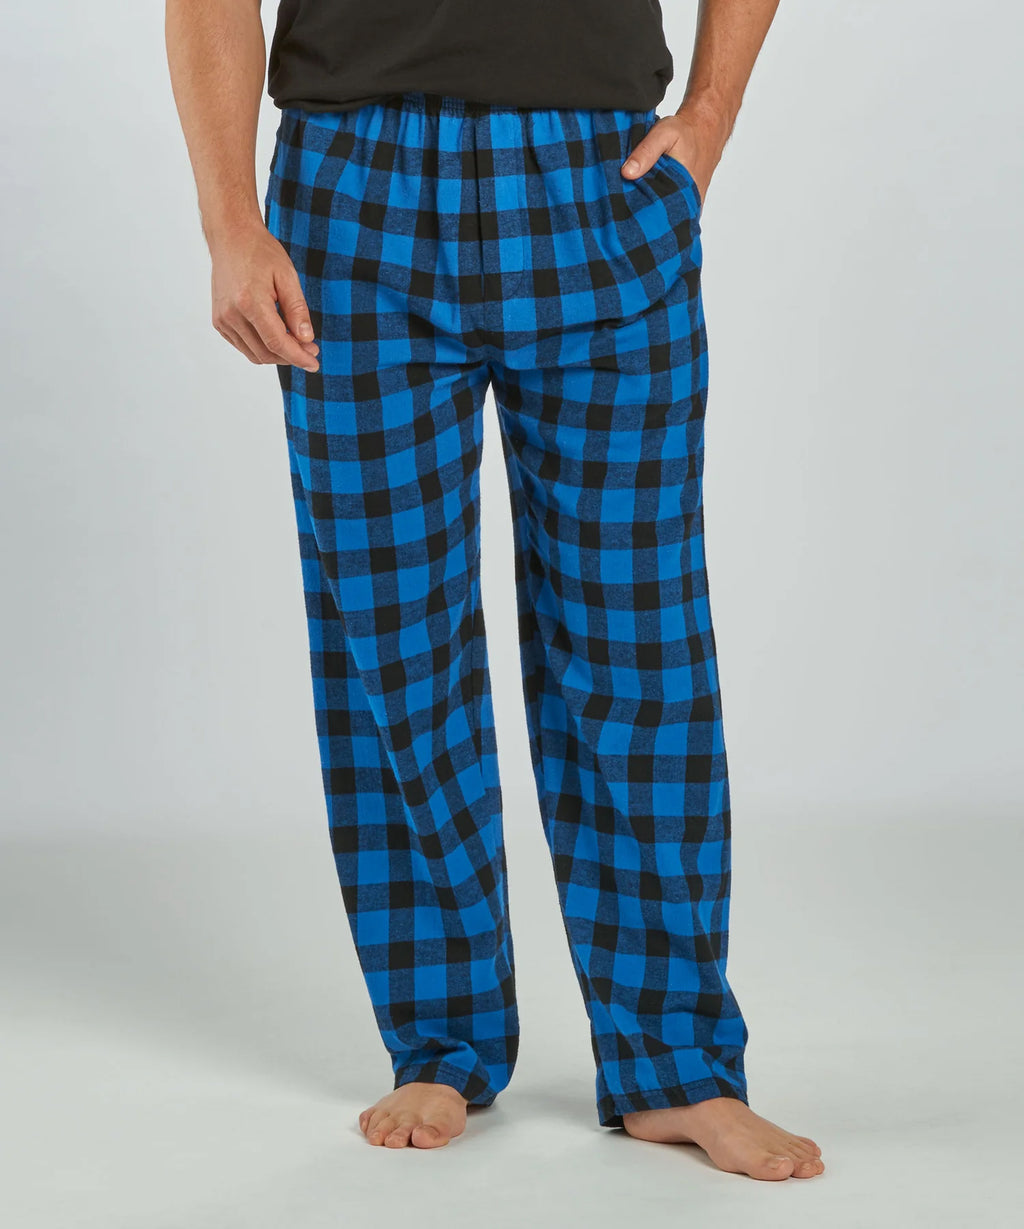 Christopher Newport University Flannel Pajama and Tshirt Set.  Black Long sleeve tshirt with the CNU Captain mascot in white.  Royal and black buffalo check flannel pants.